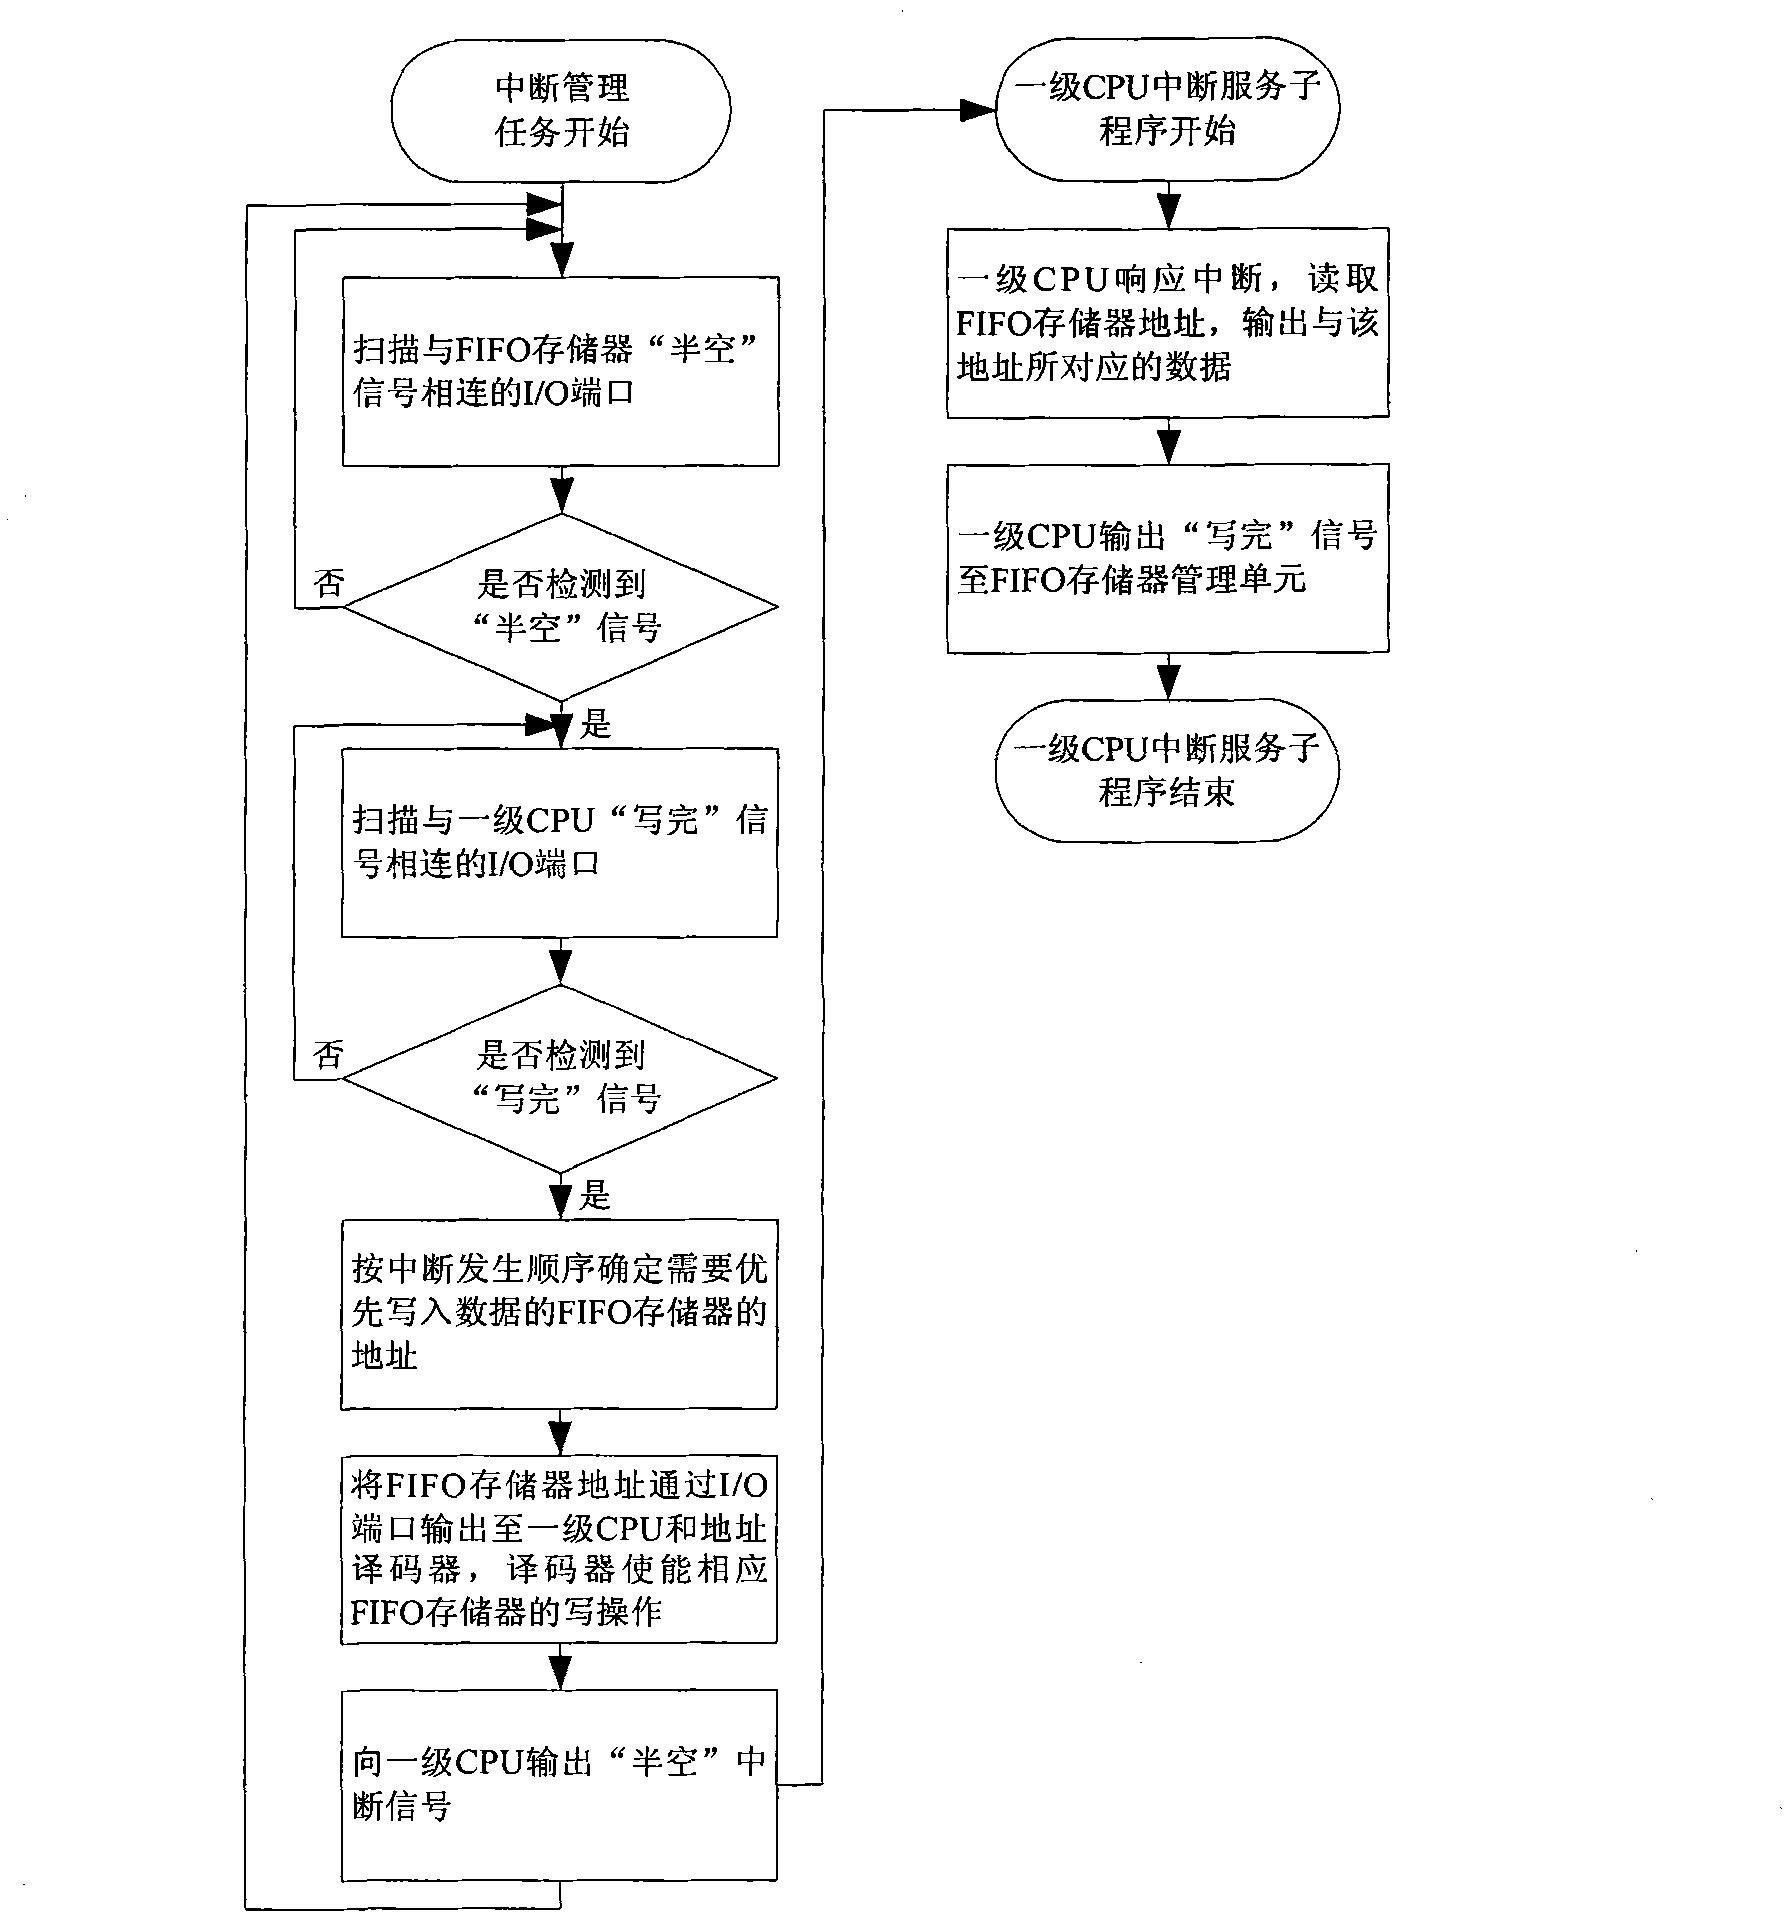 Embedded real-time emulation and fault simulation system based on multiple data buses